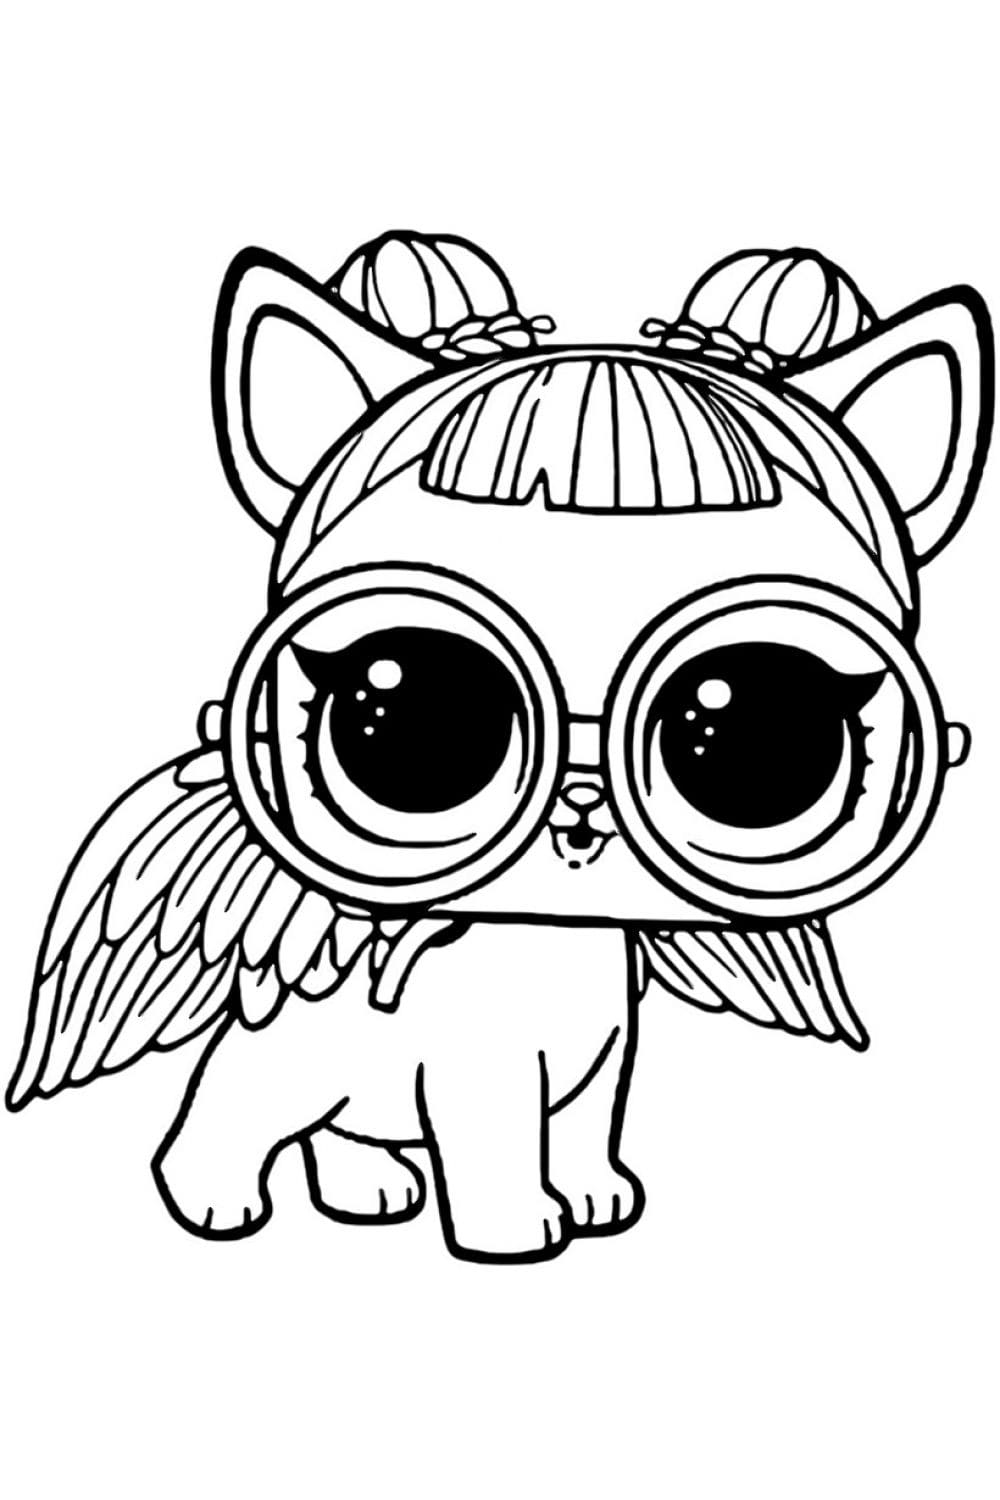 LOL Pet Puppy Sugar Coloring Page - Free Printable Coloring Pages for Kids